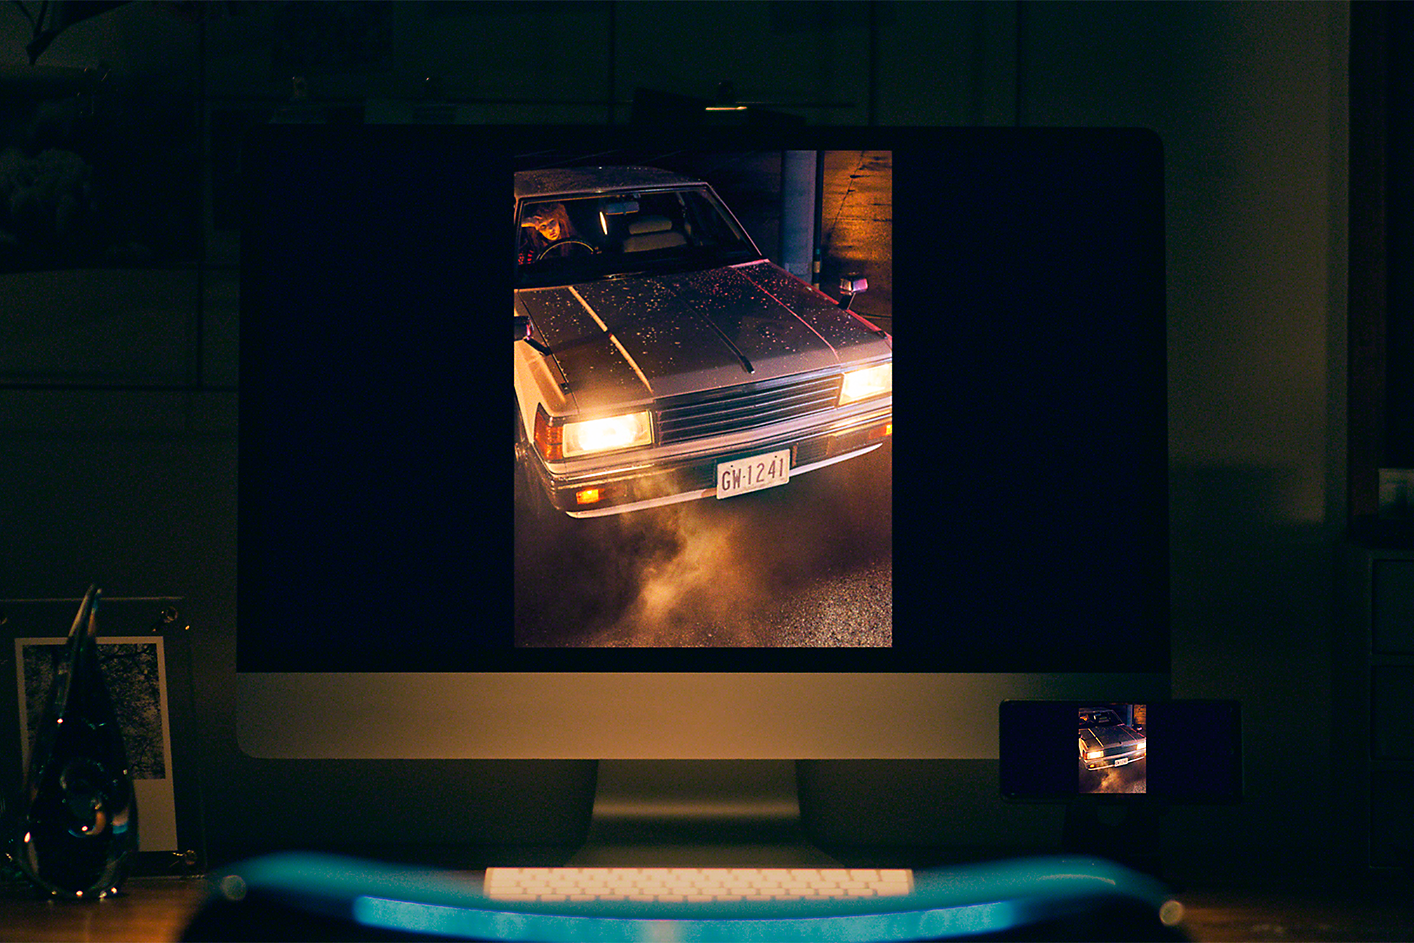 Desktop computer displaying a low-light image of a car with its headlights on